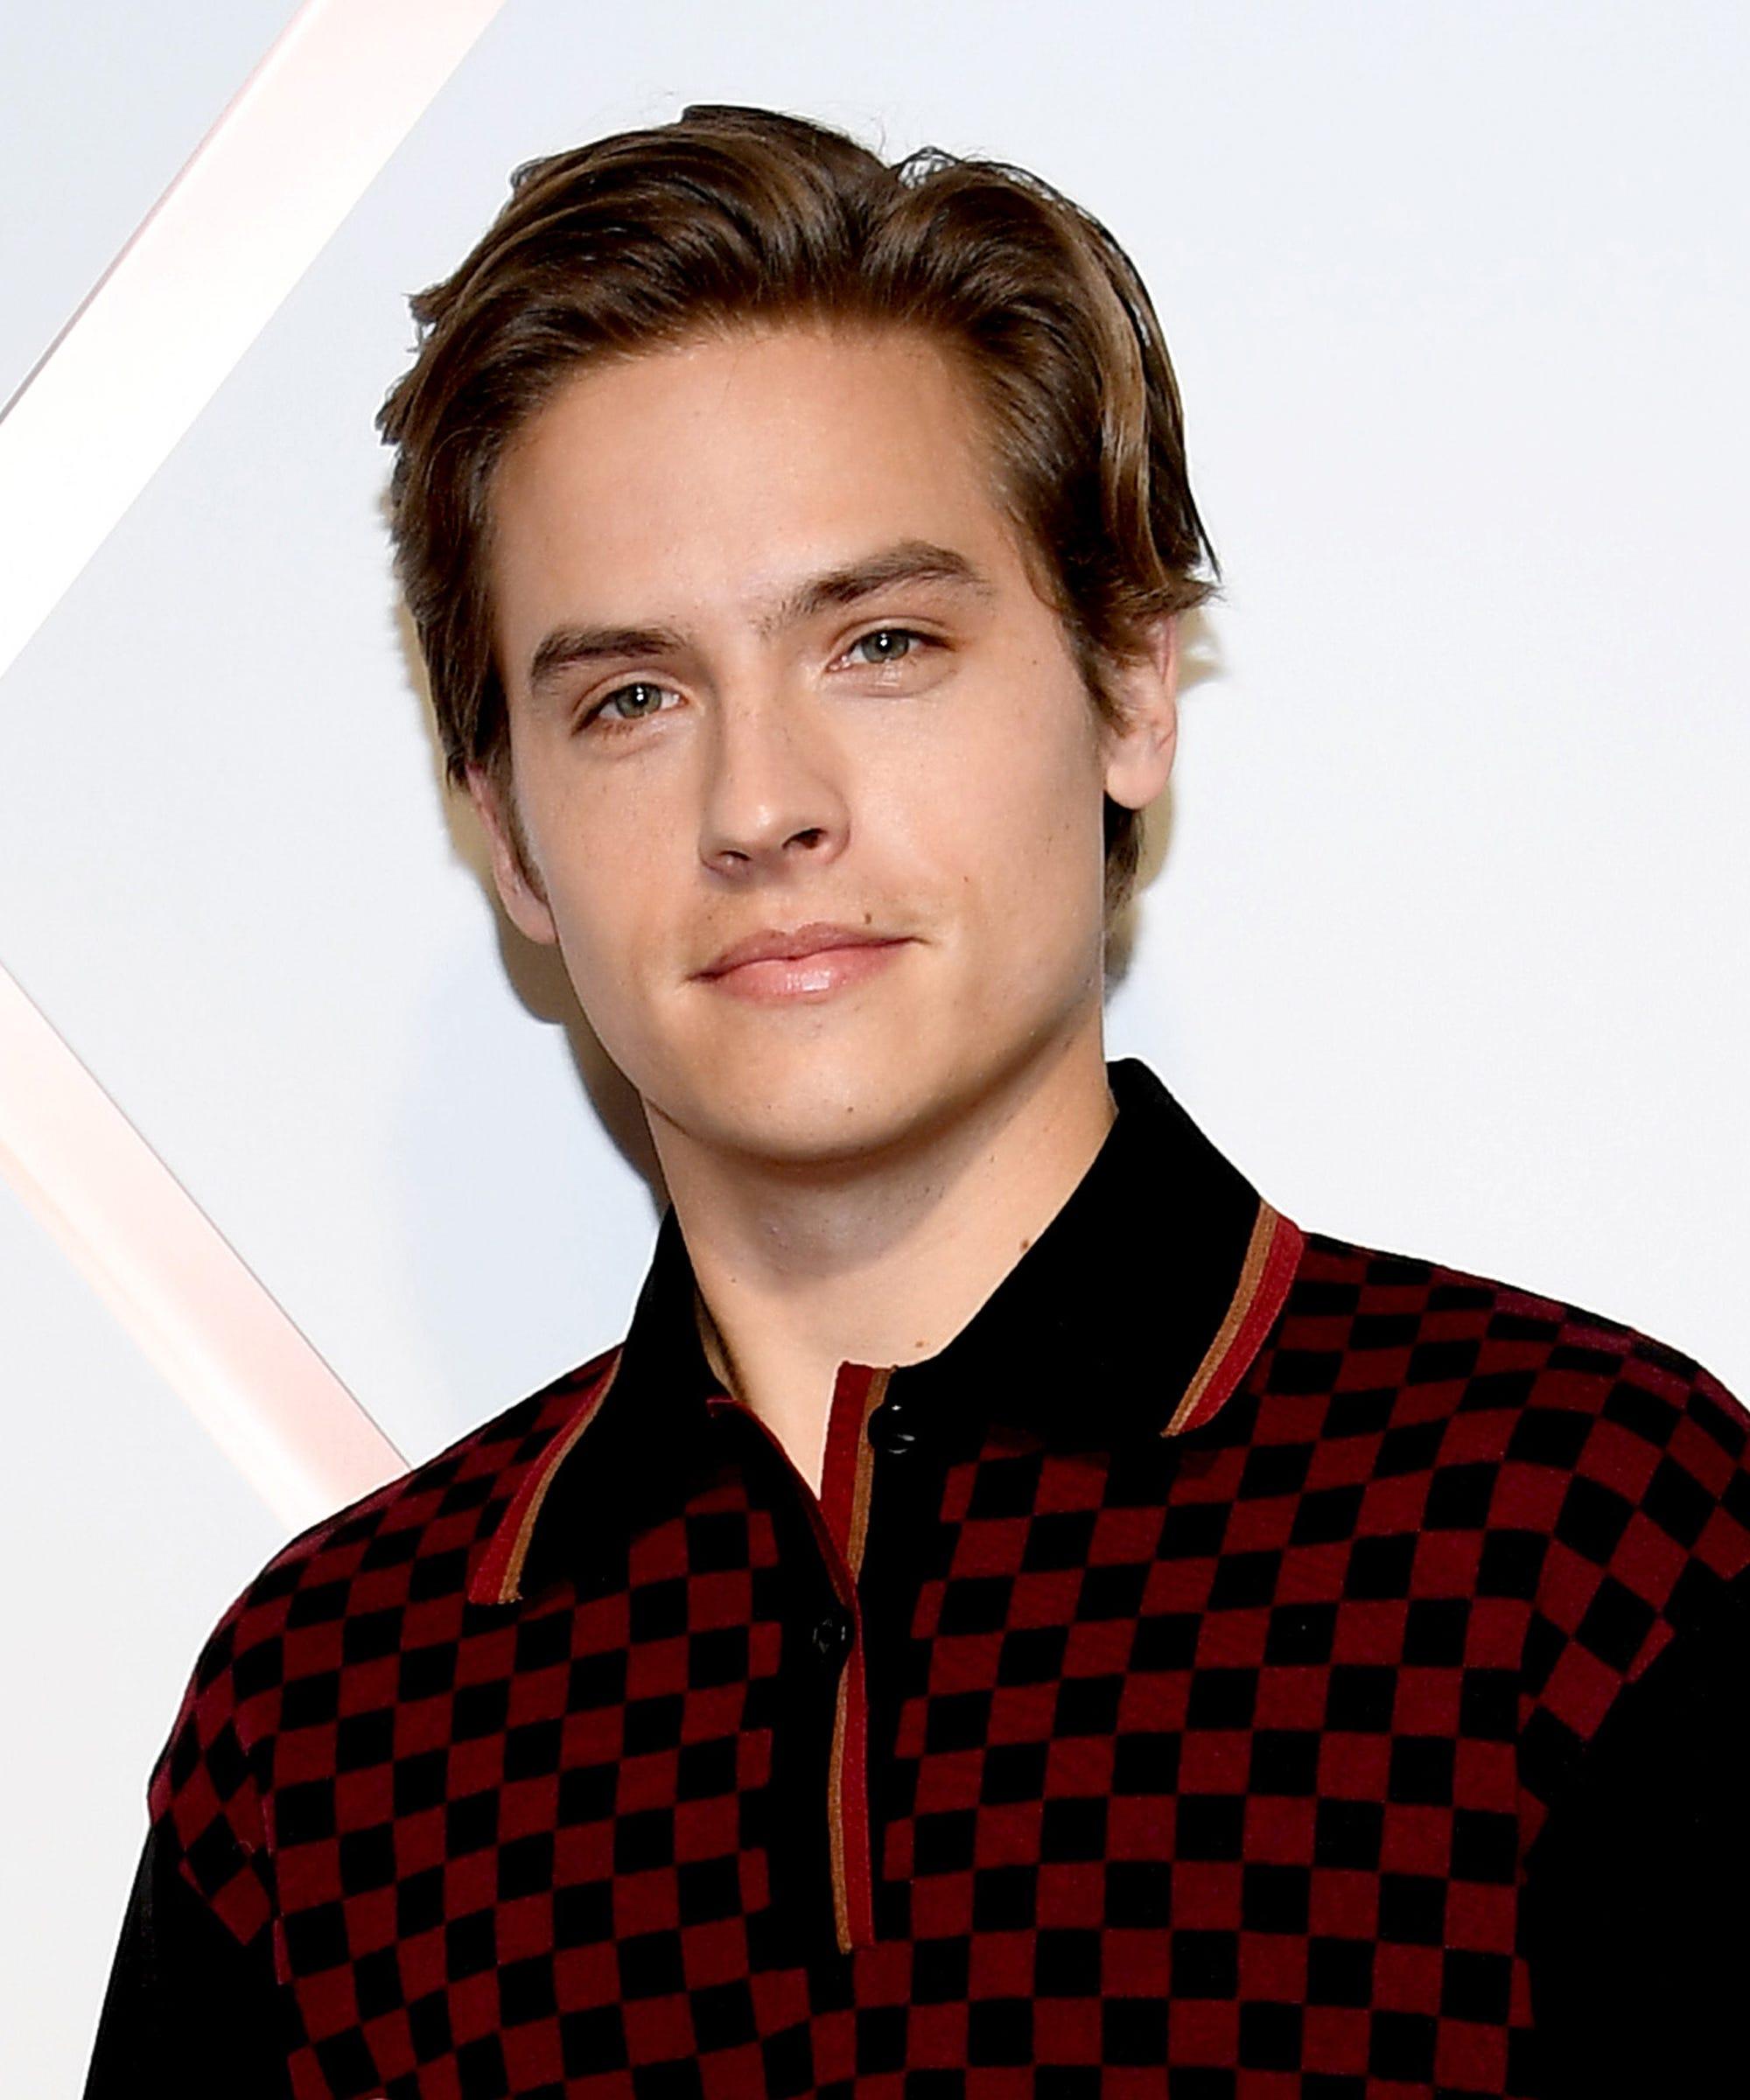 Dylan Sprouse Cast As Trevor In After We Collided Movie